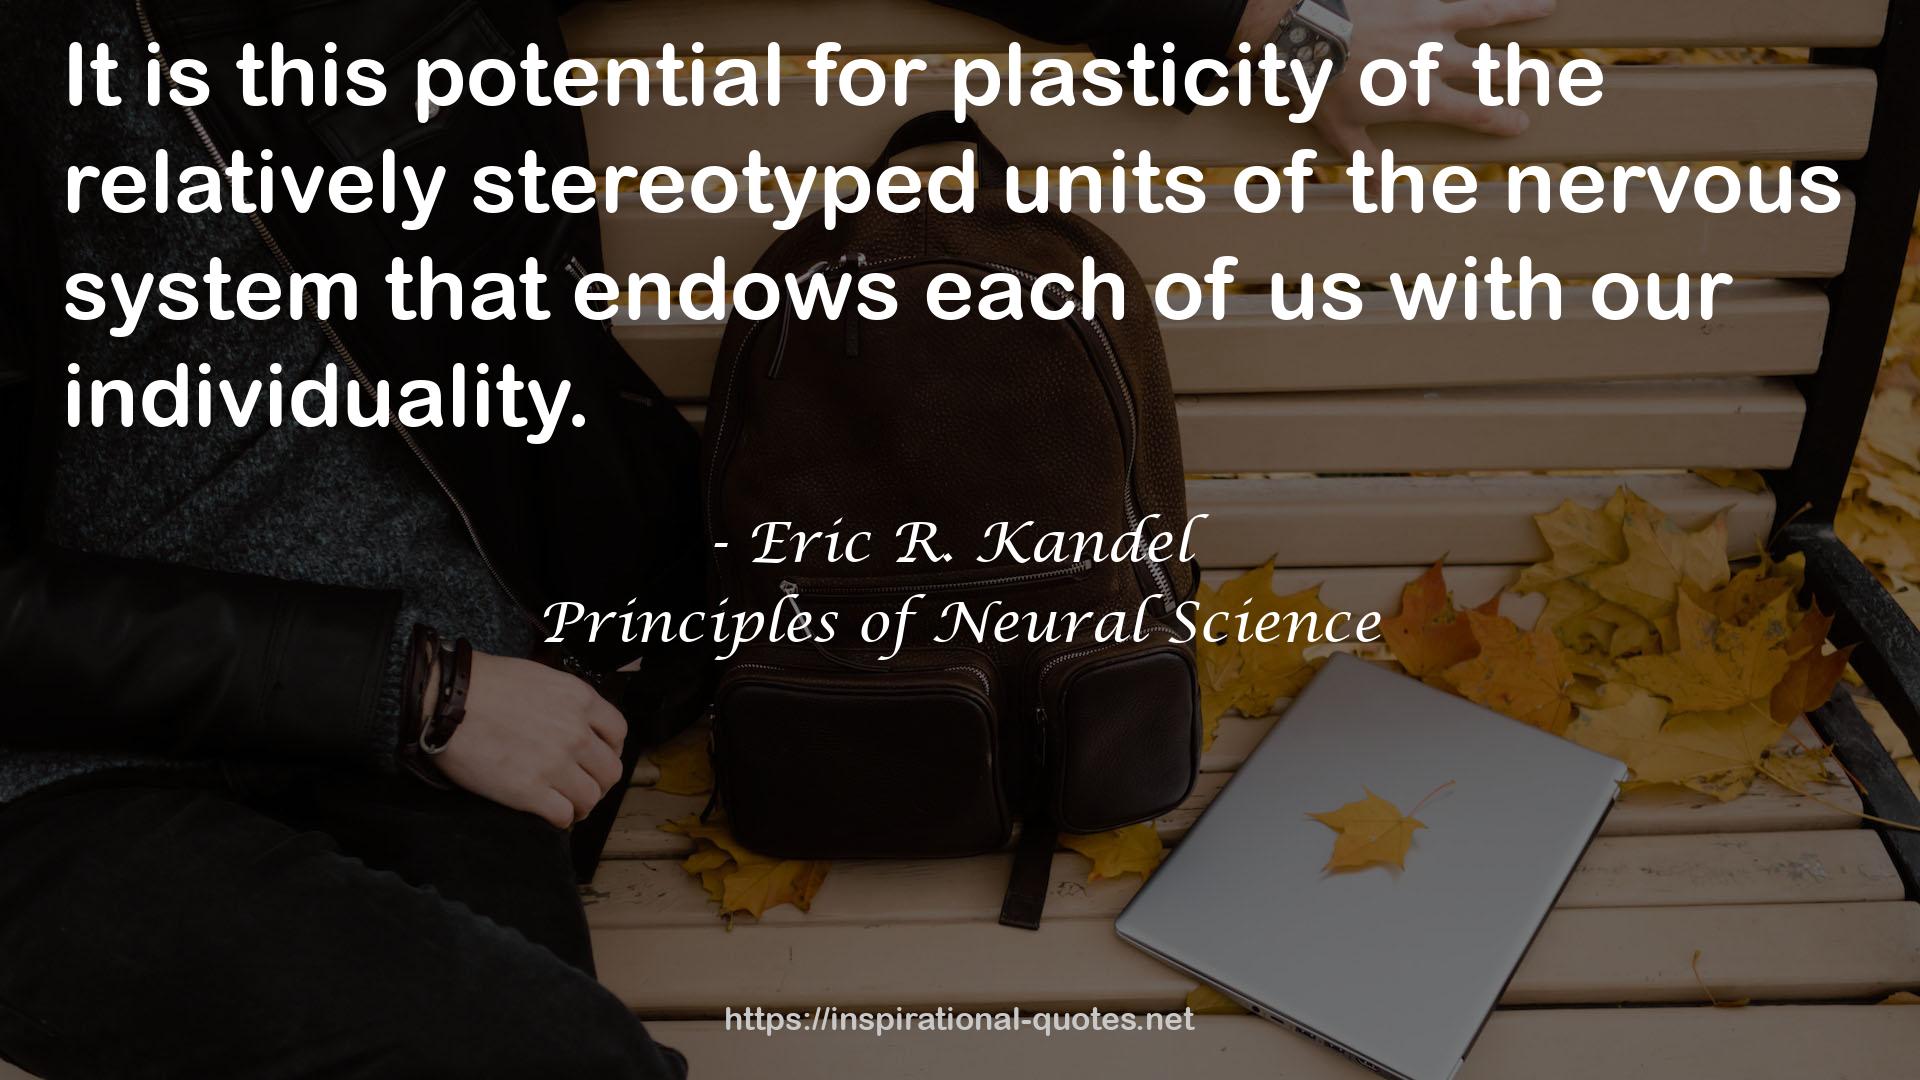 Principles of Neural Science QUOTES